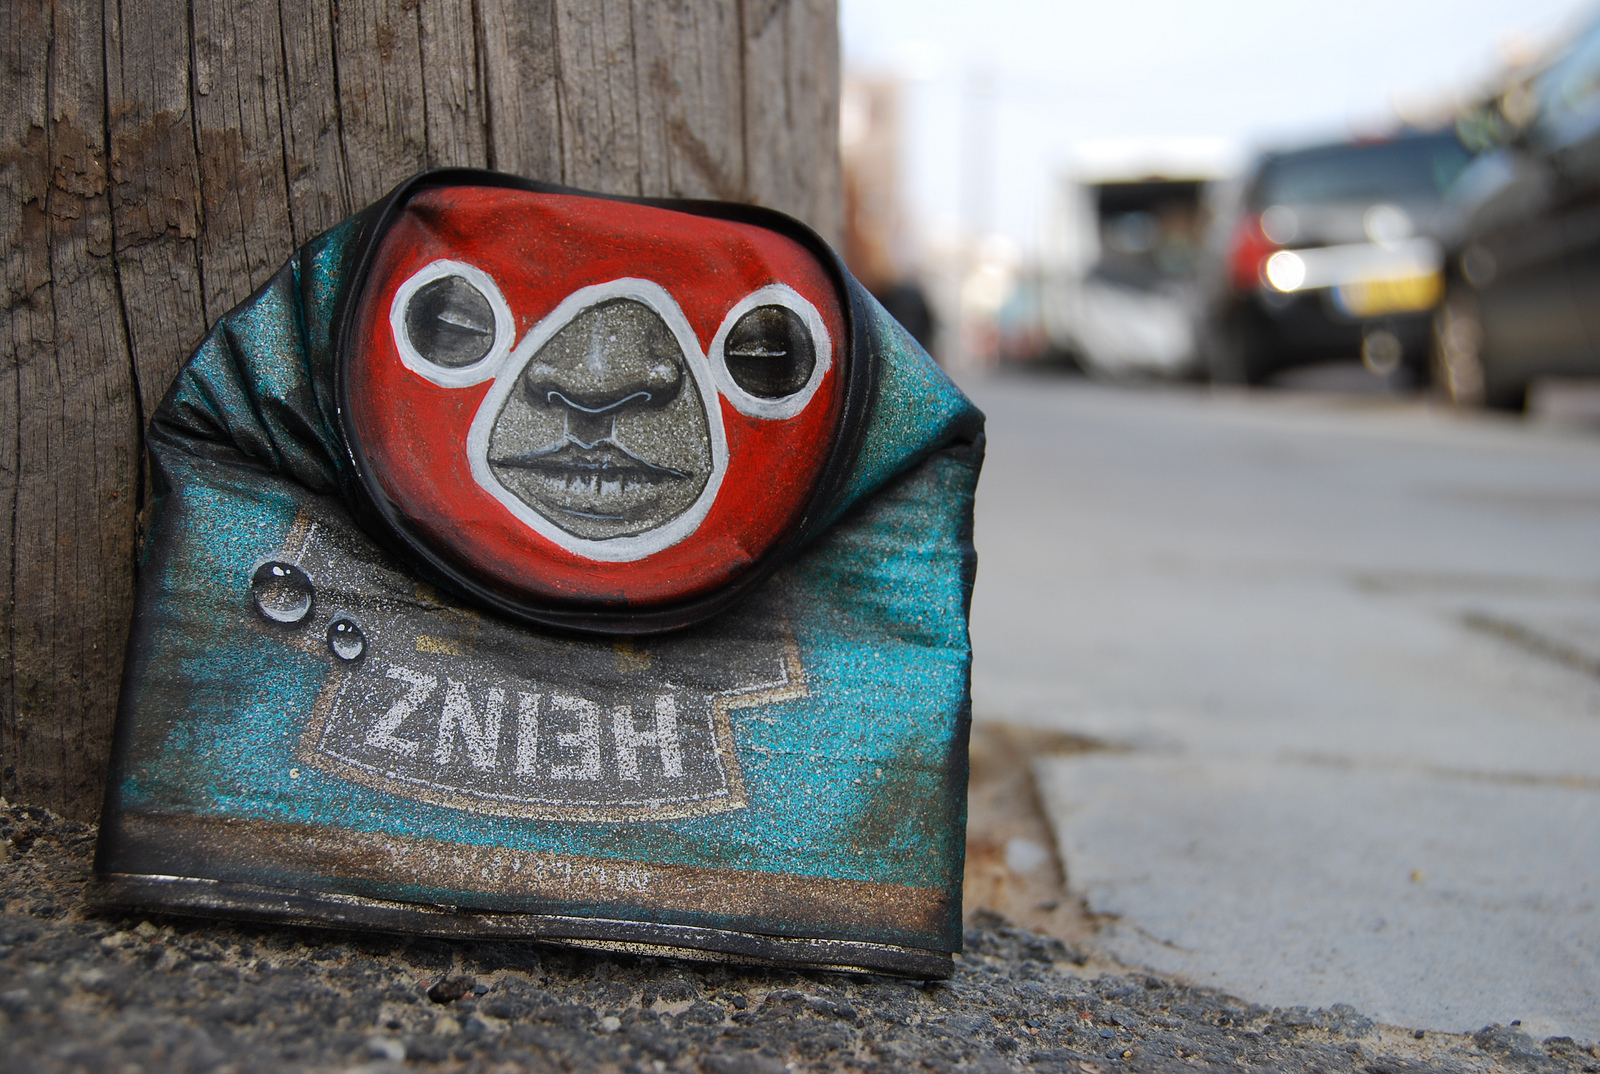 My Dog Sighs specializes in making art out of discarded products